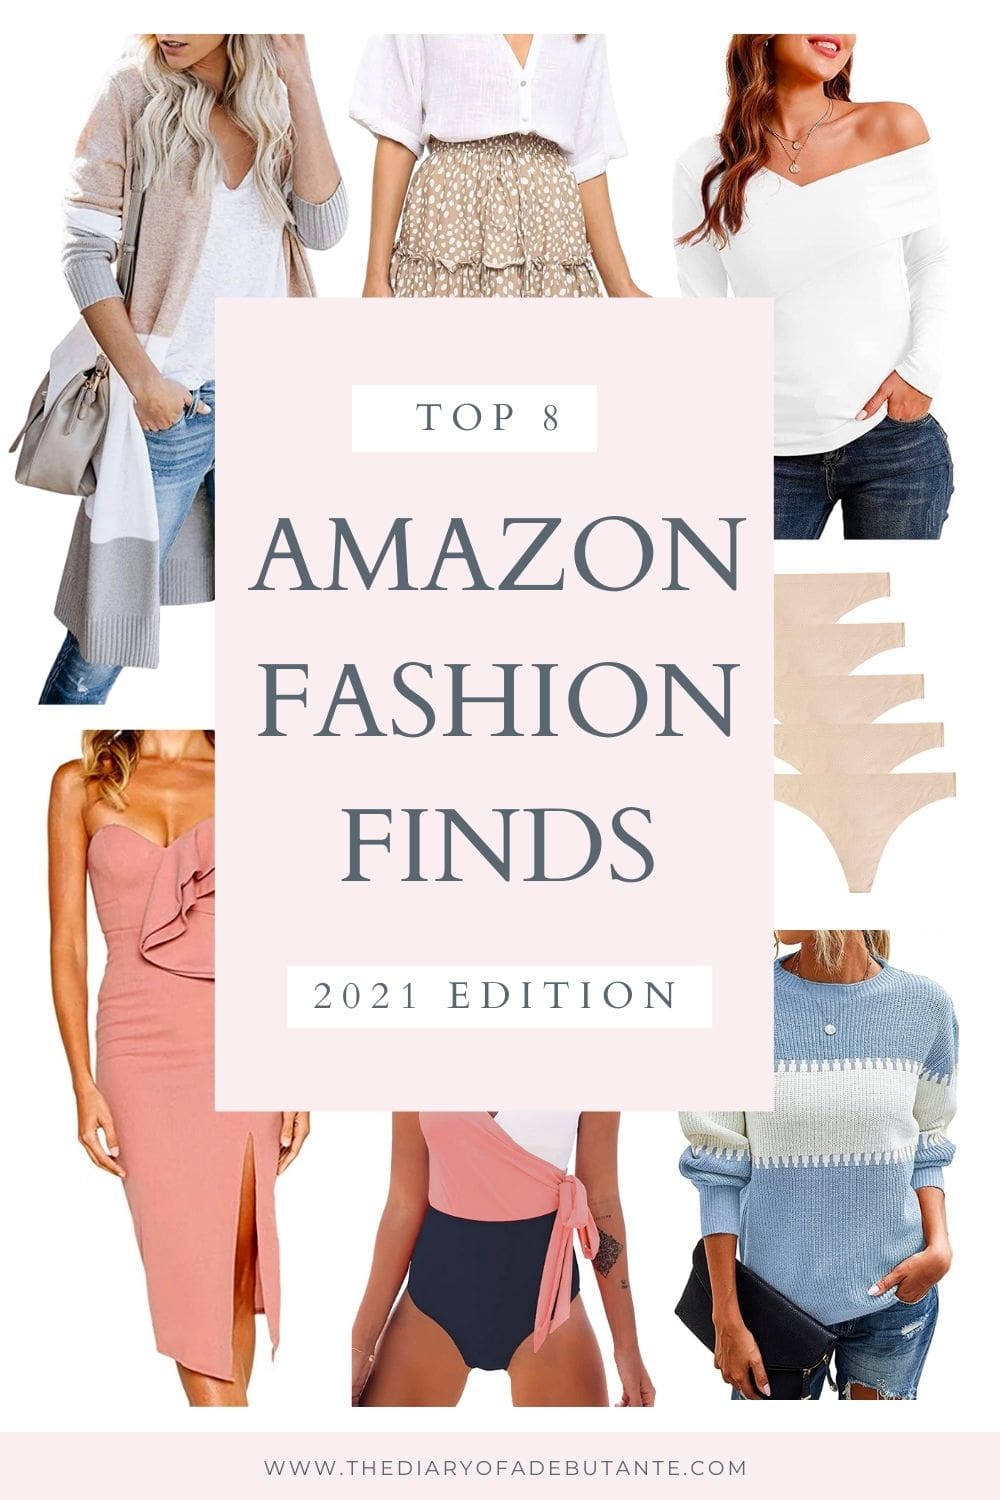 Affordable fashion blogger Stephanie Ziajka rounds up the best amazon fashion finds 2021 on Diary of a Debutante